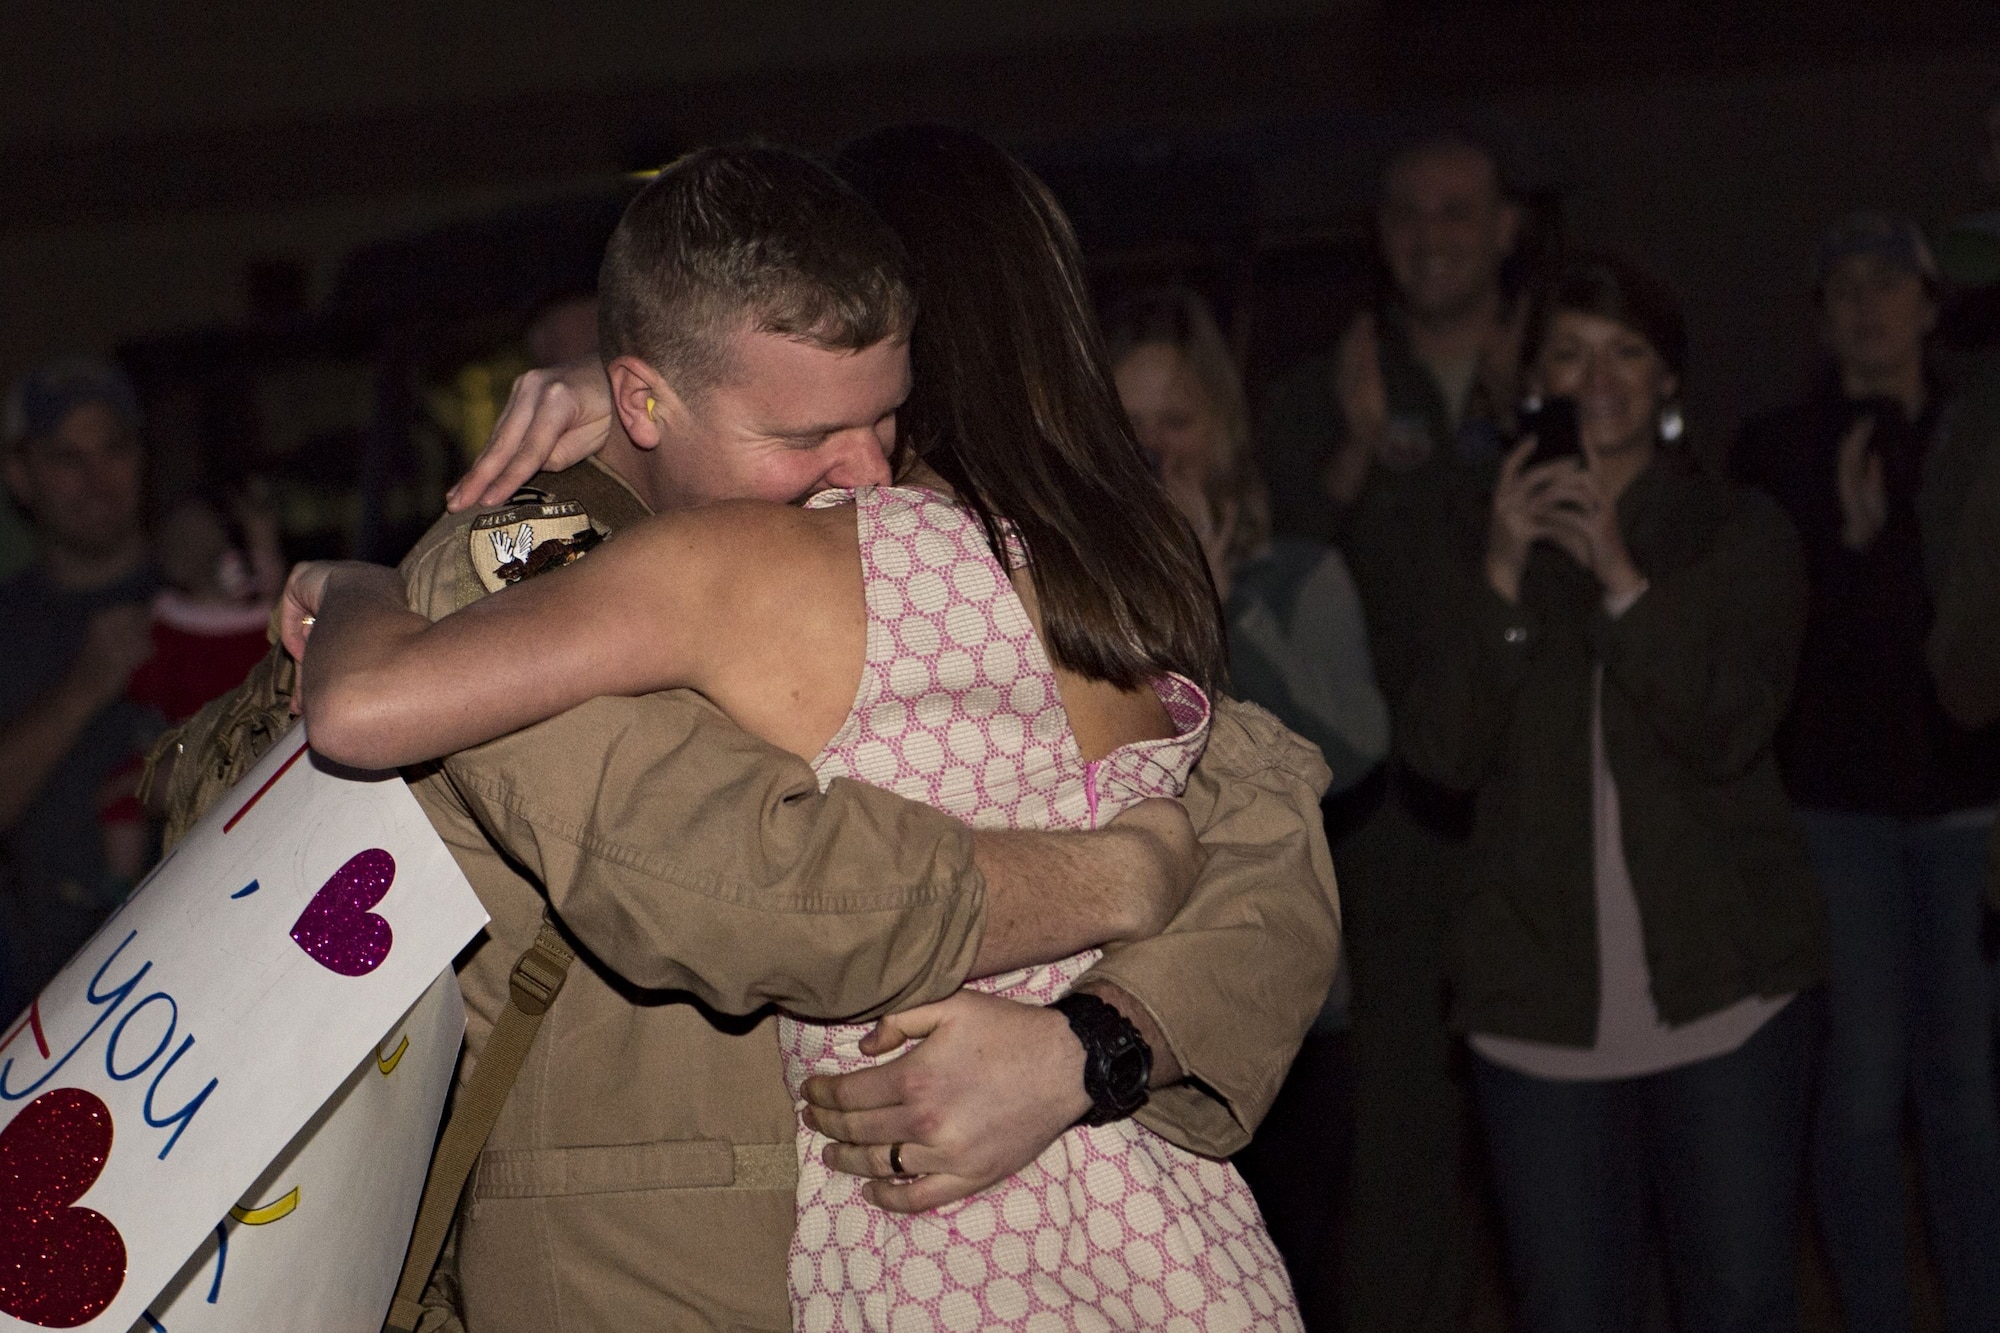 Capt. Ryan Siebert, 74th Fighter Squadron A-10C Thunderbolt II pilot, embraces his spouse, Sarah, during a redeployment, Jan. 23, 2018, at Moody Air Force Base, Ga. Airmen from the 74th Fighter Squadron and 23d Maintenance Group returned home after a seven-month deployment in support of Operation Inherent Resolve. (U.S. Air Force photo by Senior Airman Daniel Snider)